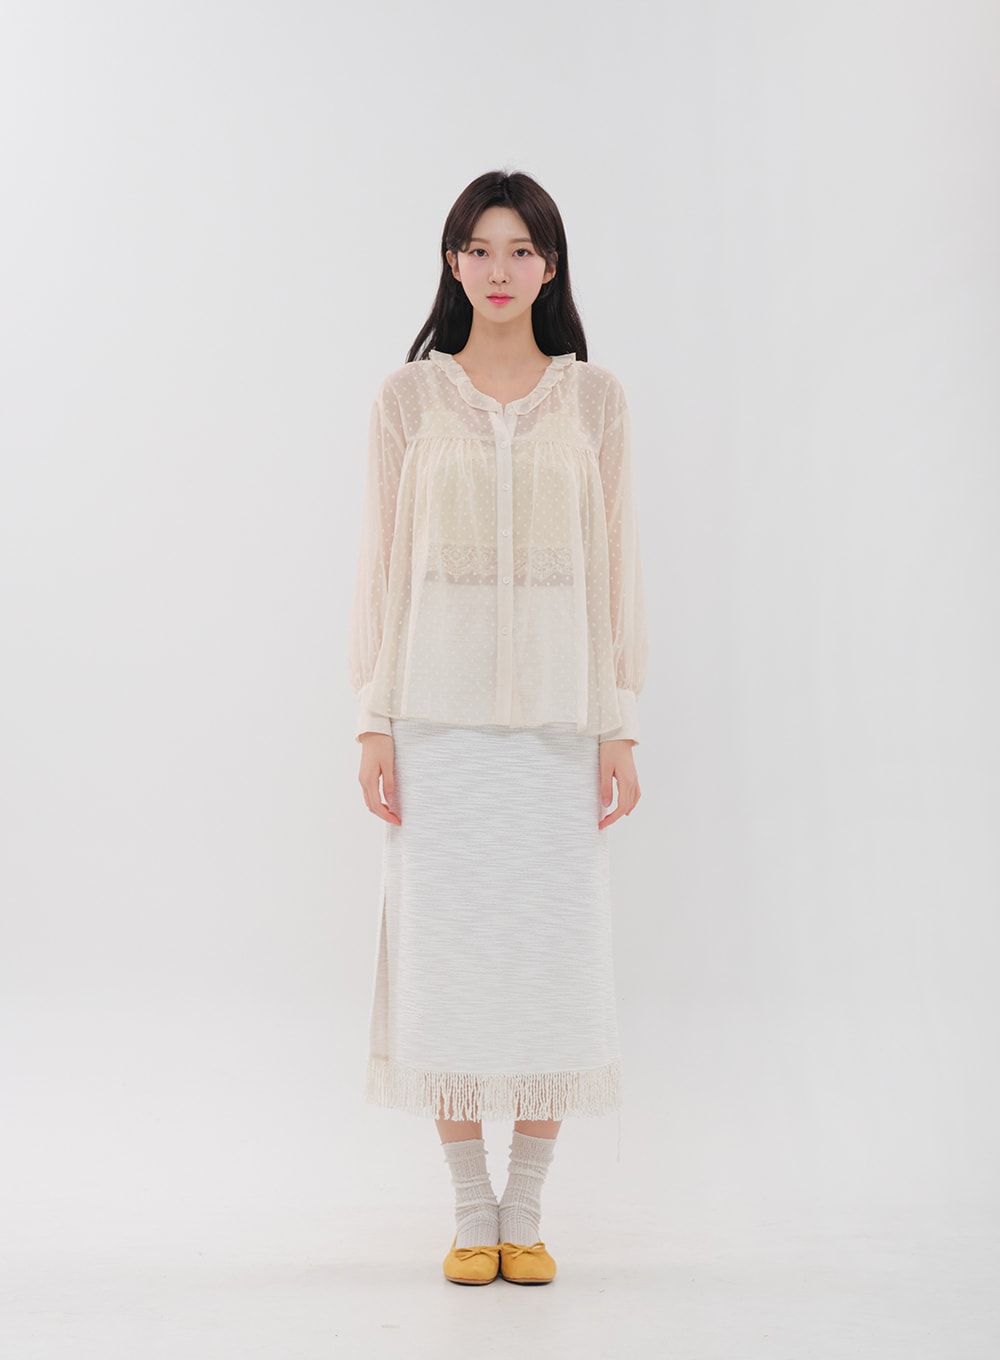 Sheer Blouse with Frill Collar BM12